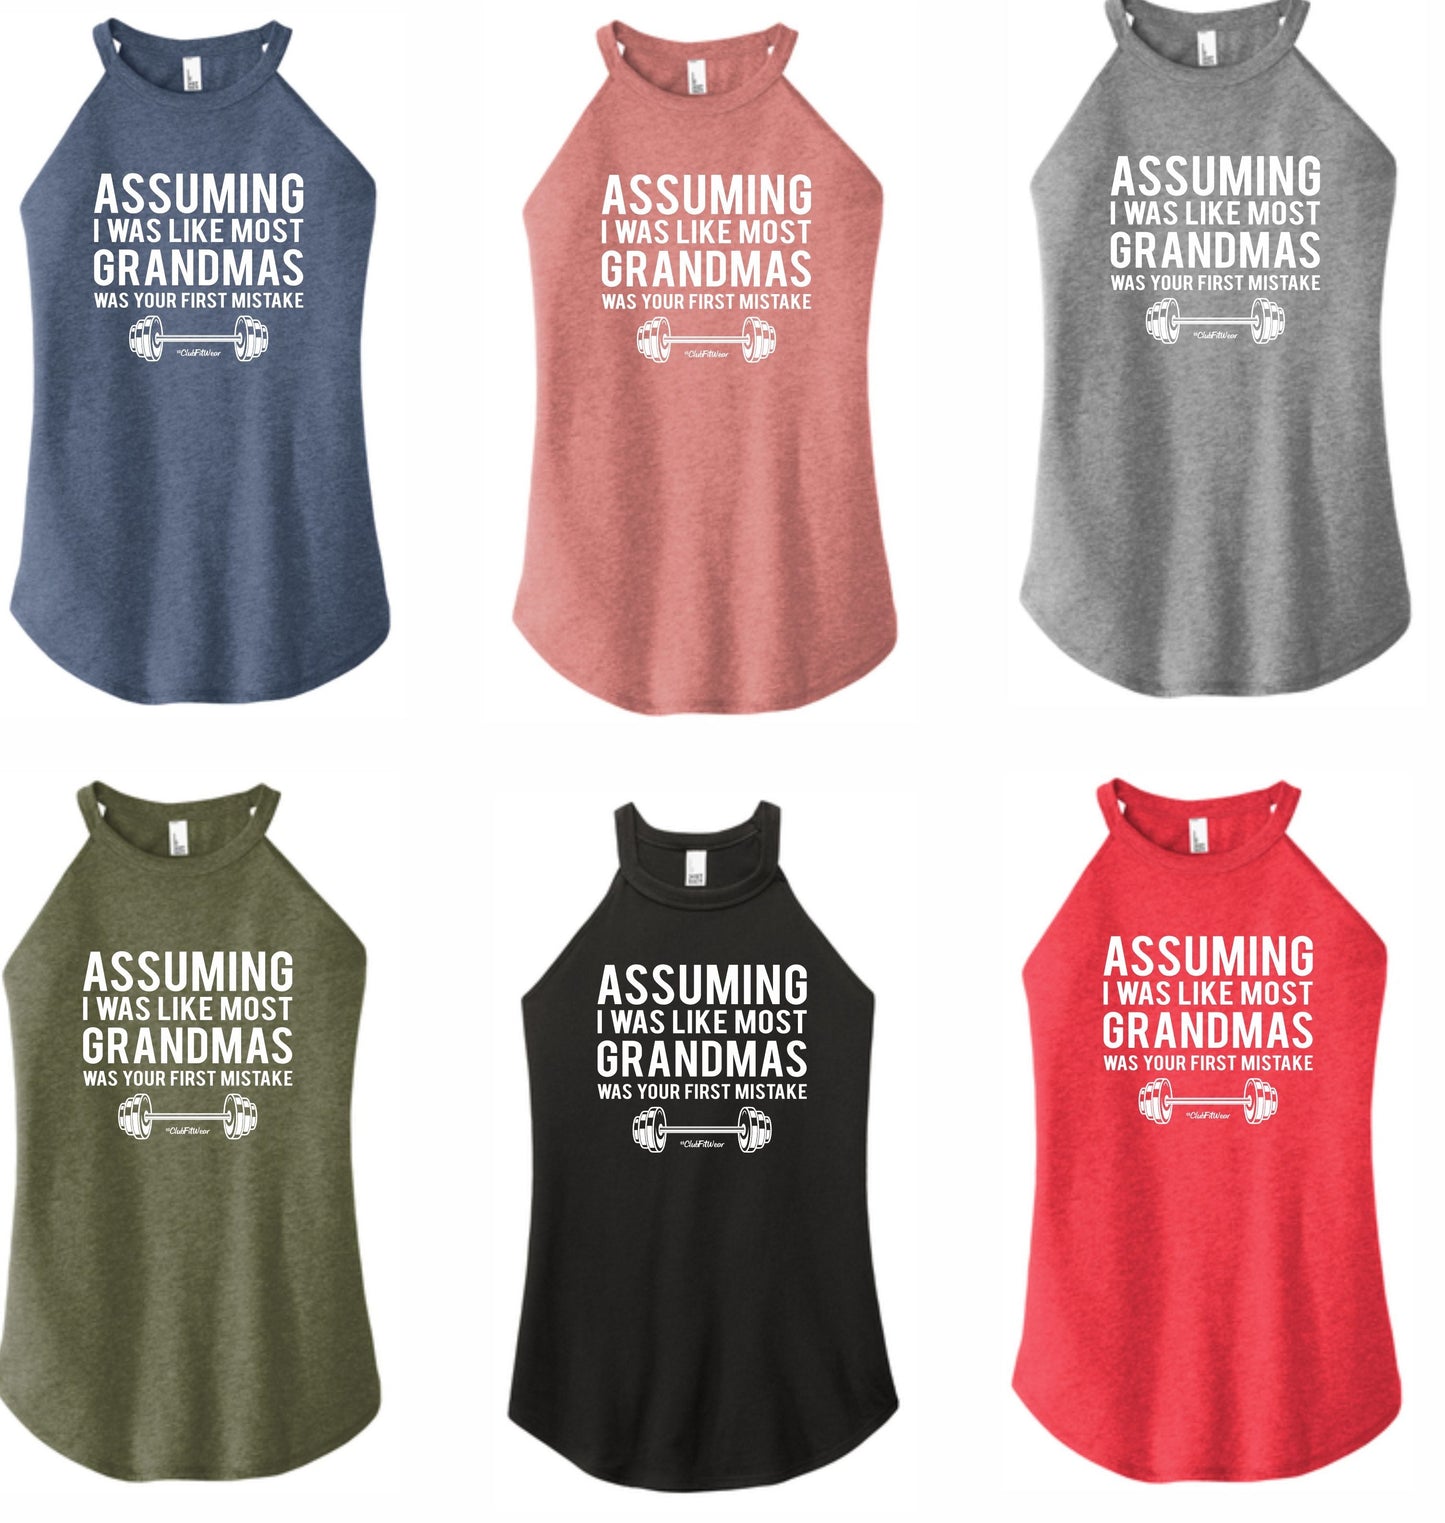 Assuming I was like most Grandmas was your first mistake - High Neck Rocker Tank